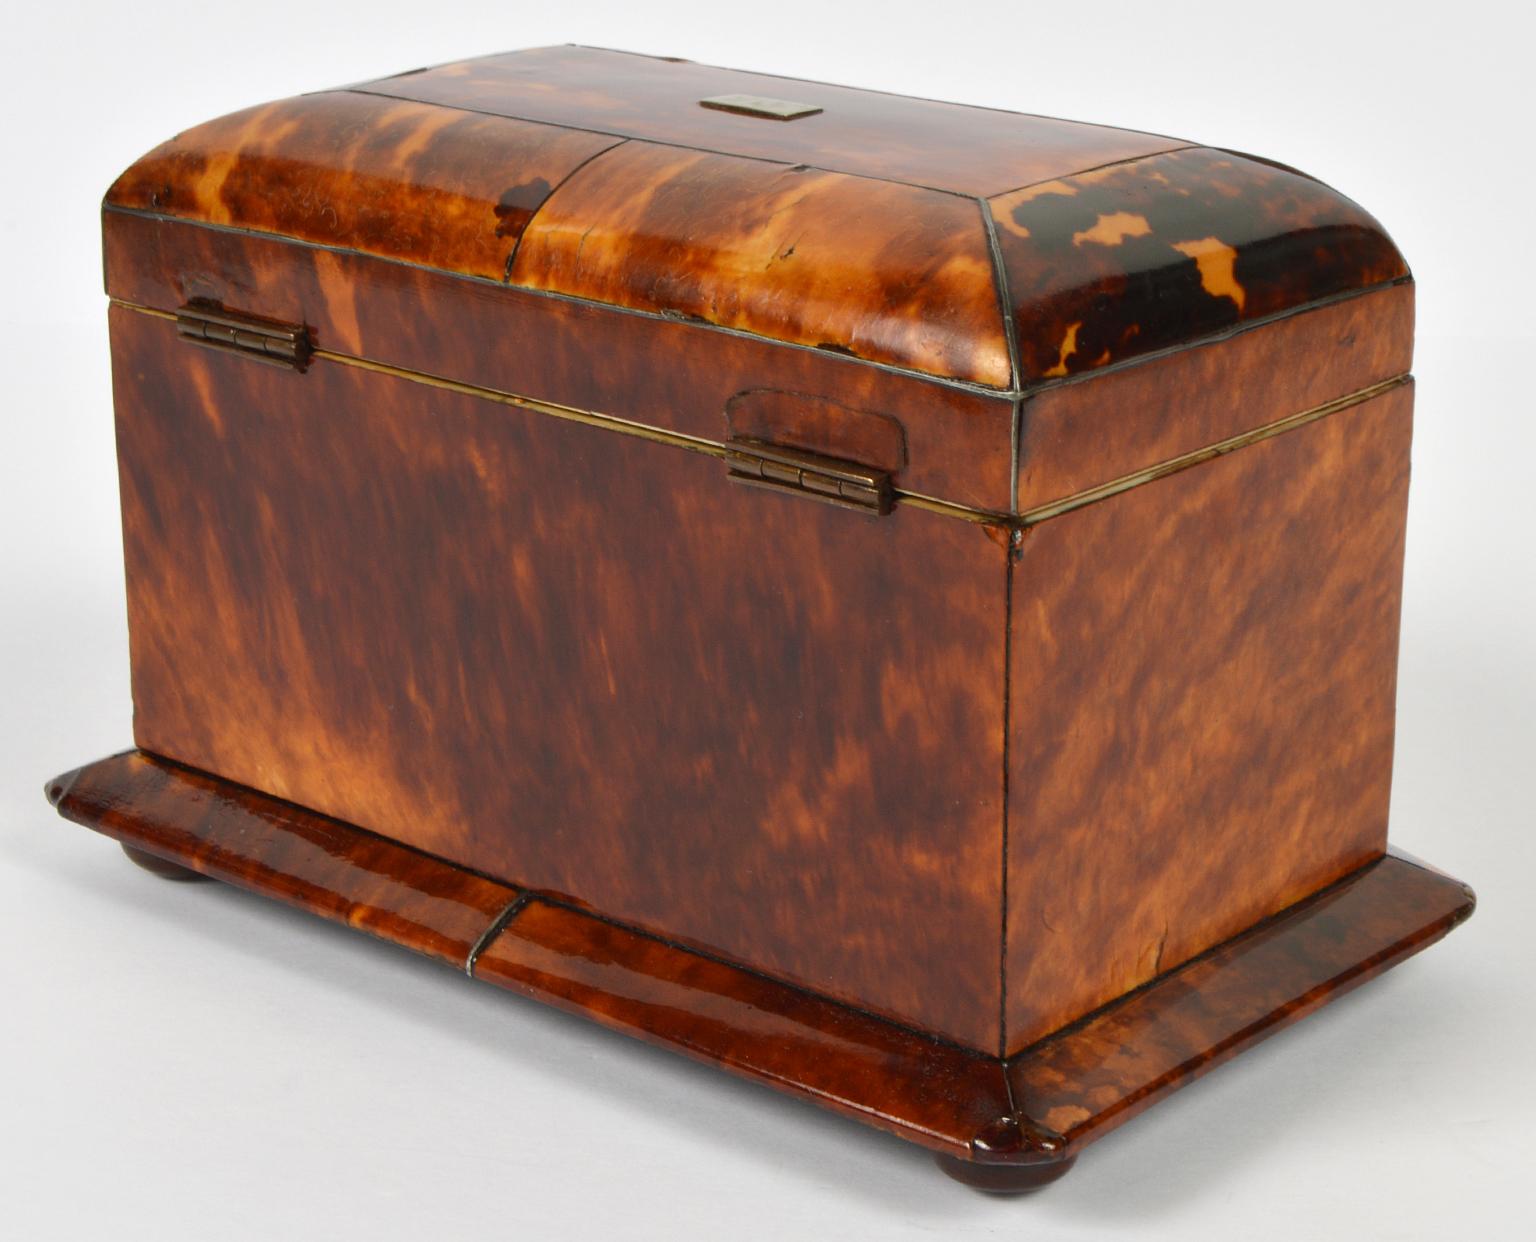 A fine English regency silver stringed tortoise shell tea caddy with architecturally shaped front, matching domed top and skirted body resting on mahogany bun feet. The top opens up to an interior fitted with two foil lined compartments, tortoise